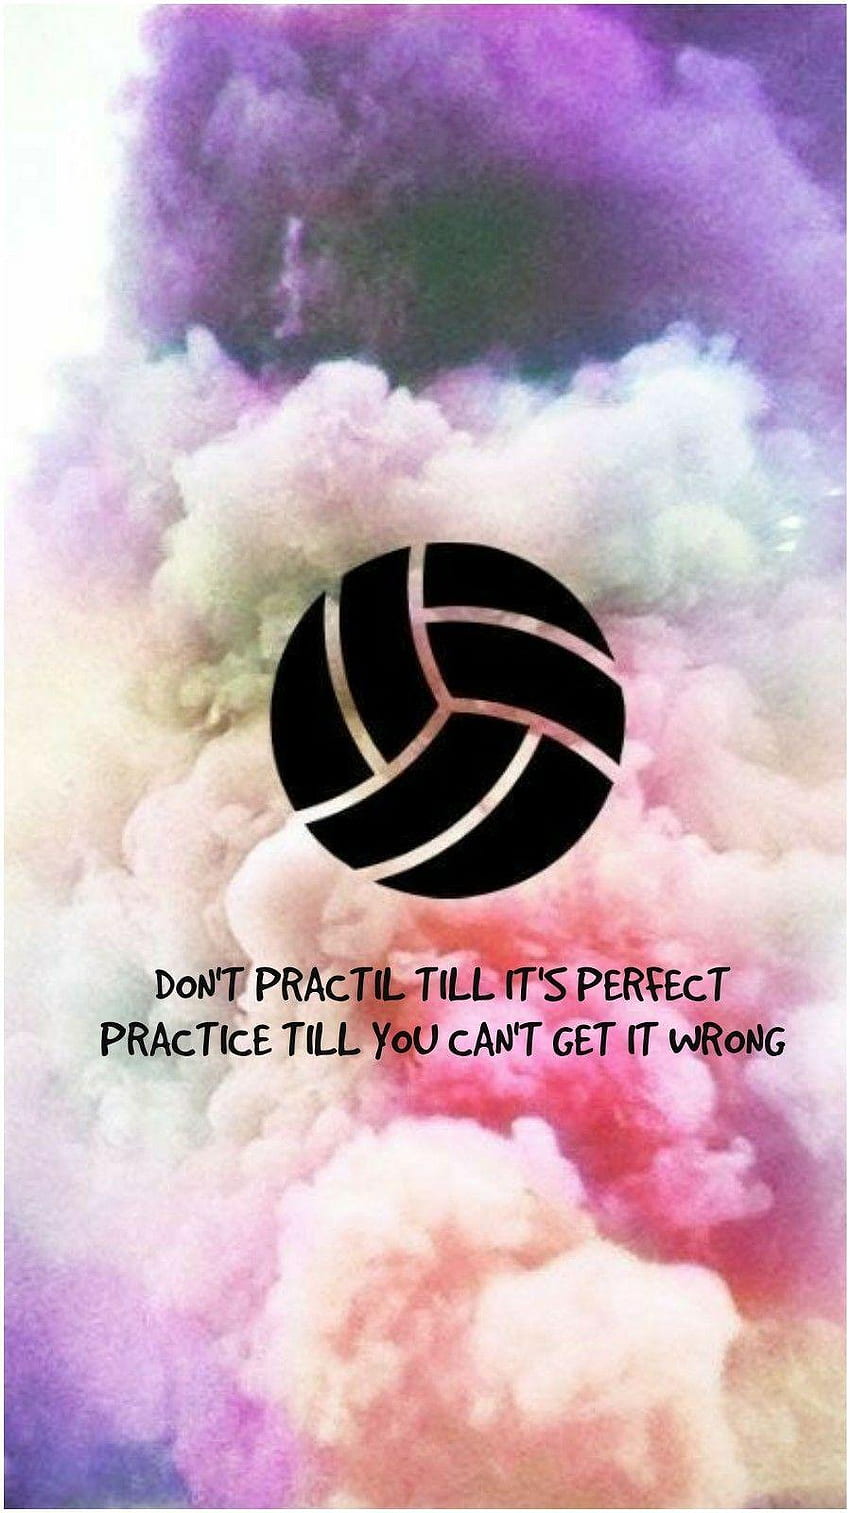 100 Volleyball Aesthetic Wallpapers  Wallpaperscom